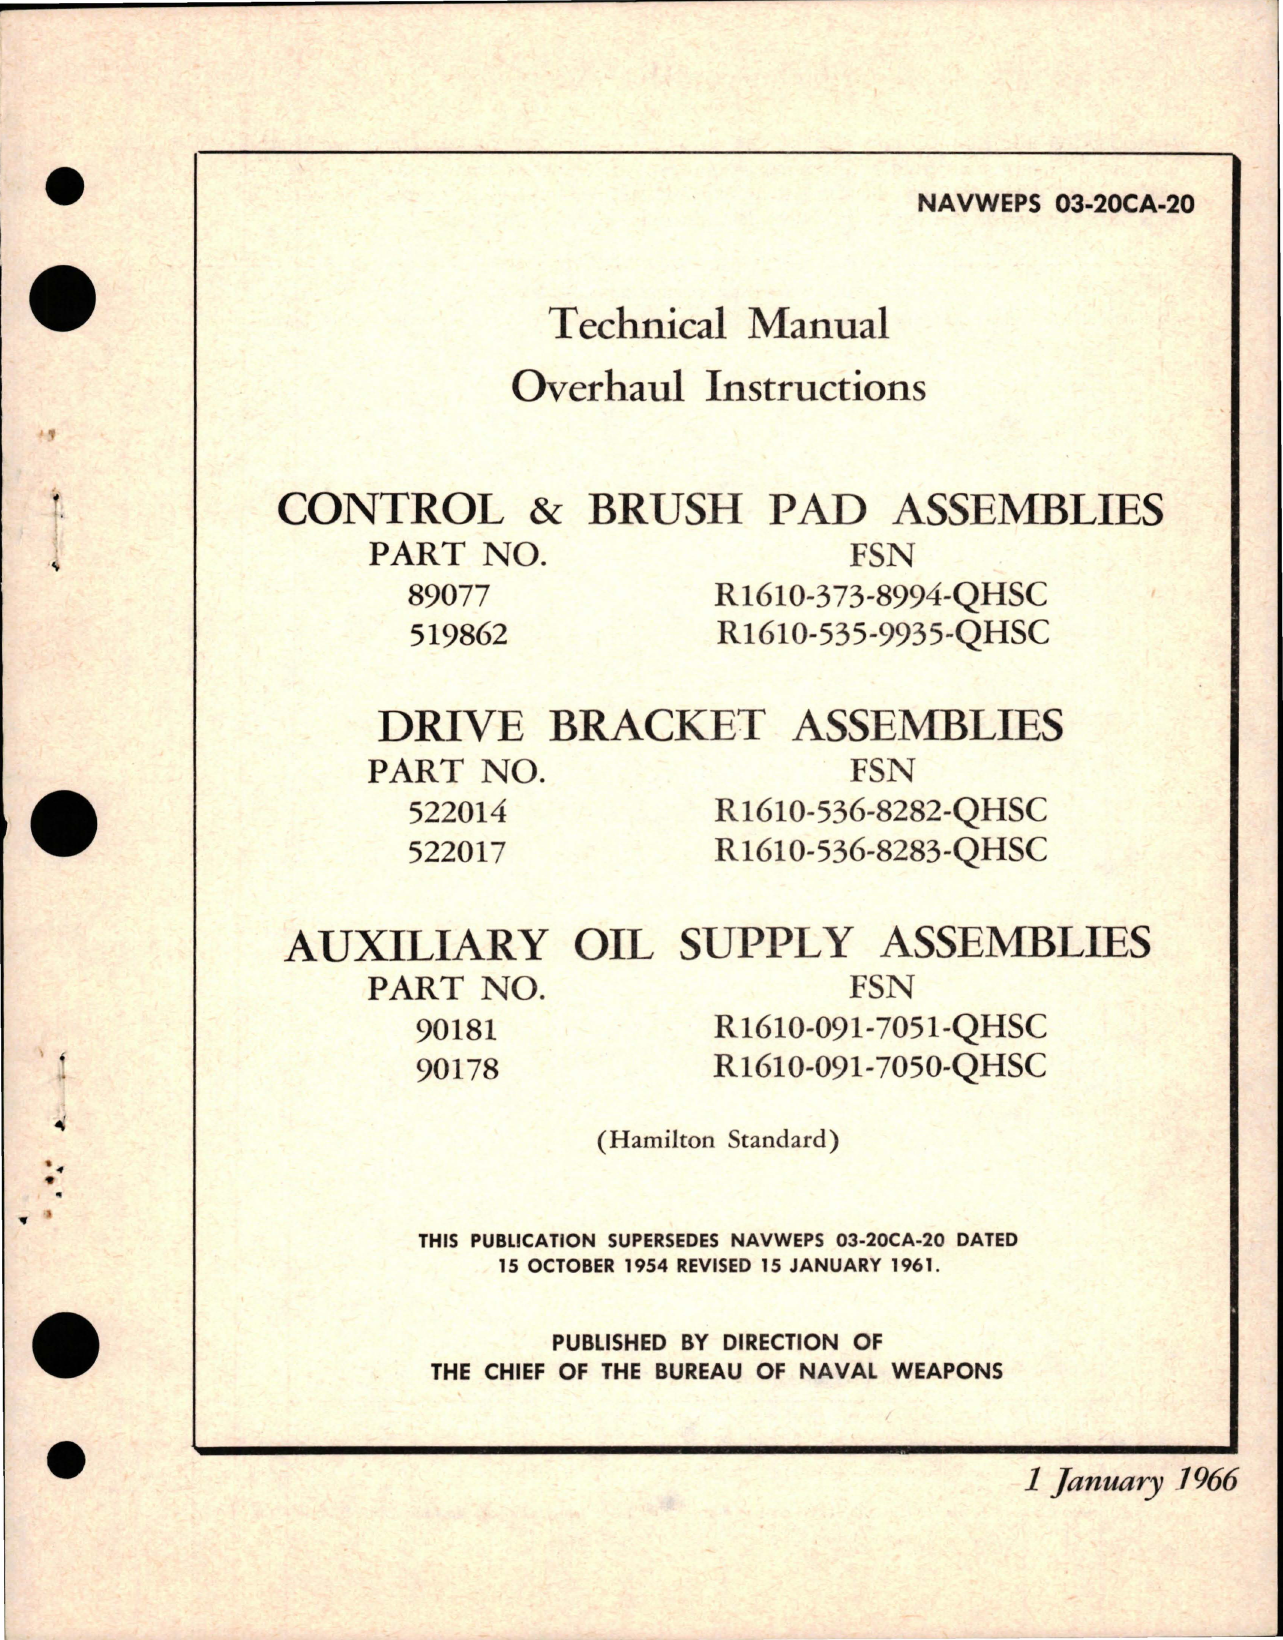 Sample page 1 from AirCorps Library document: Overhaul Instructions for Control & Brush Pad Assy, Drive Bracket Assy, and Auxiliary Oil Supply Assy